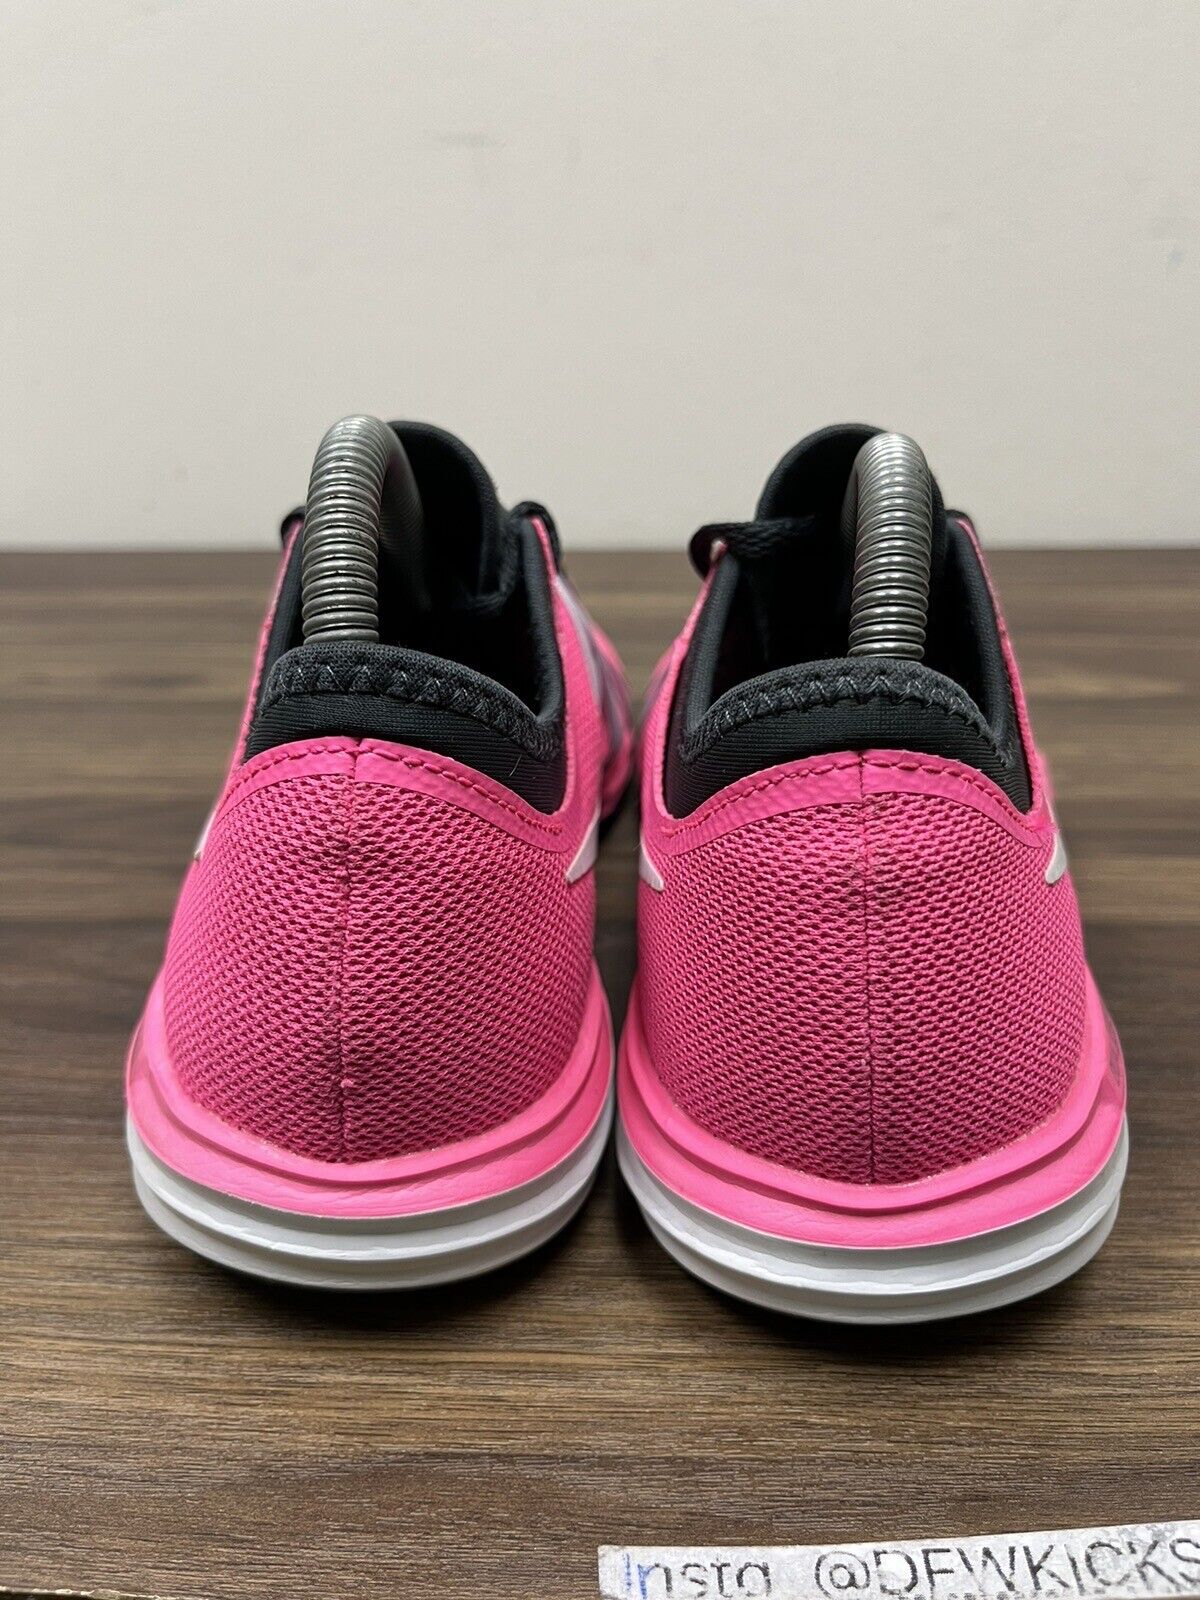 Nike Dual Fusion Hit Pink Black Womens US Size 7.5  844674-600 Running Shoes